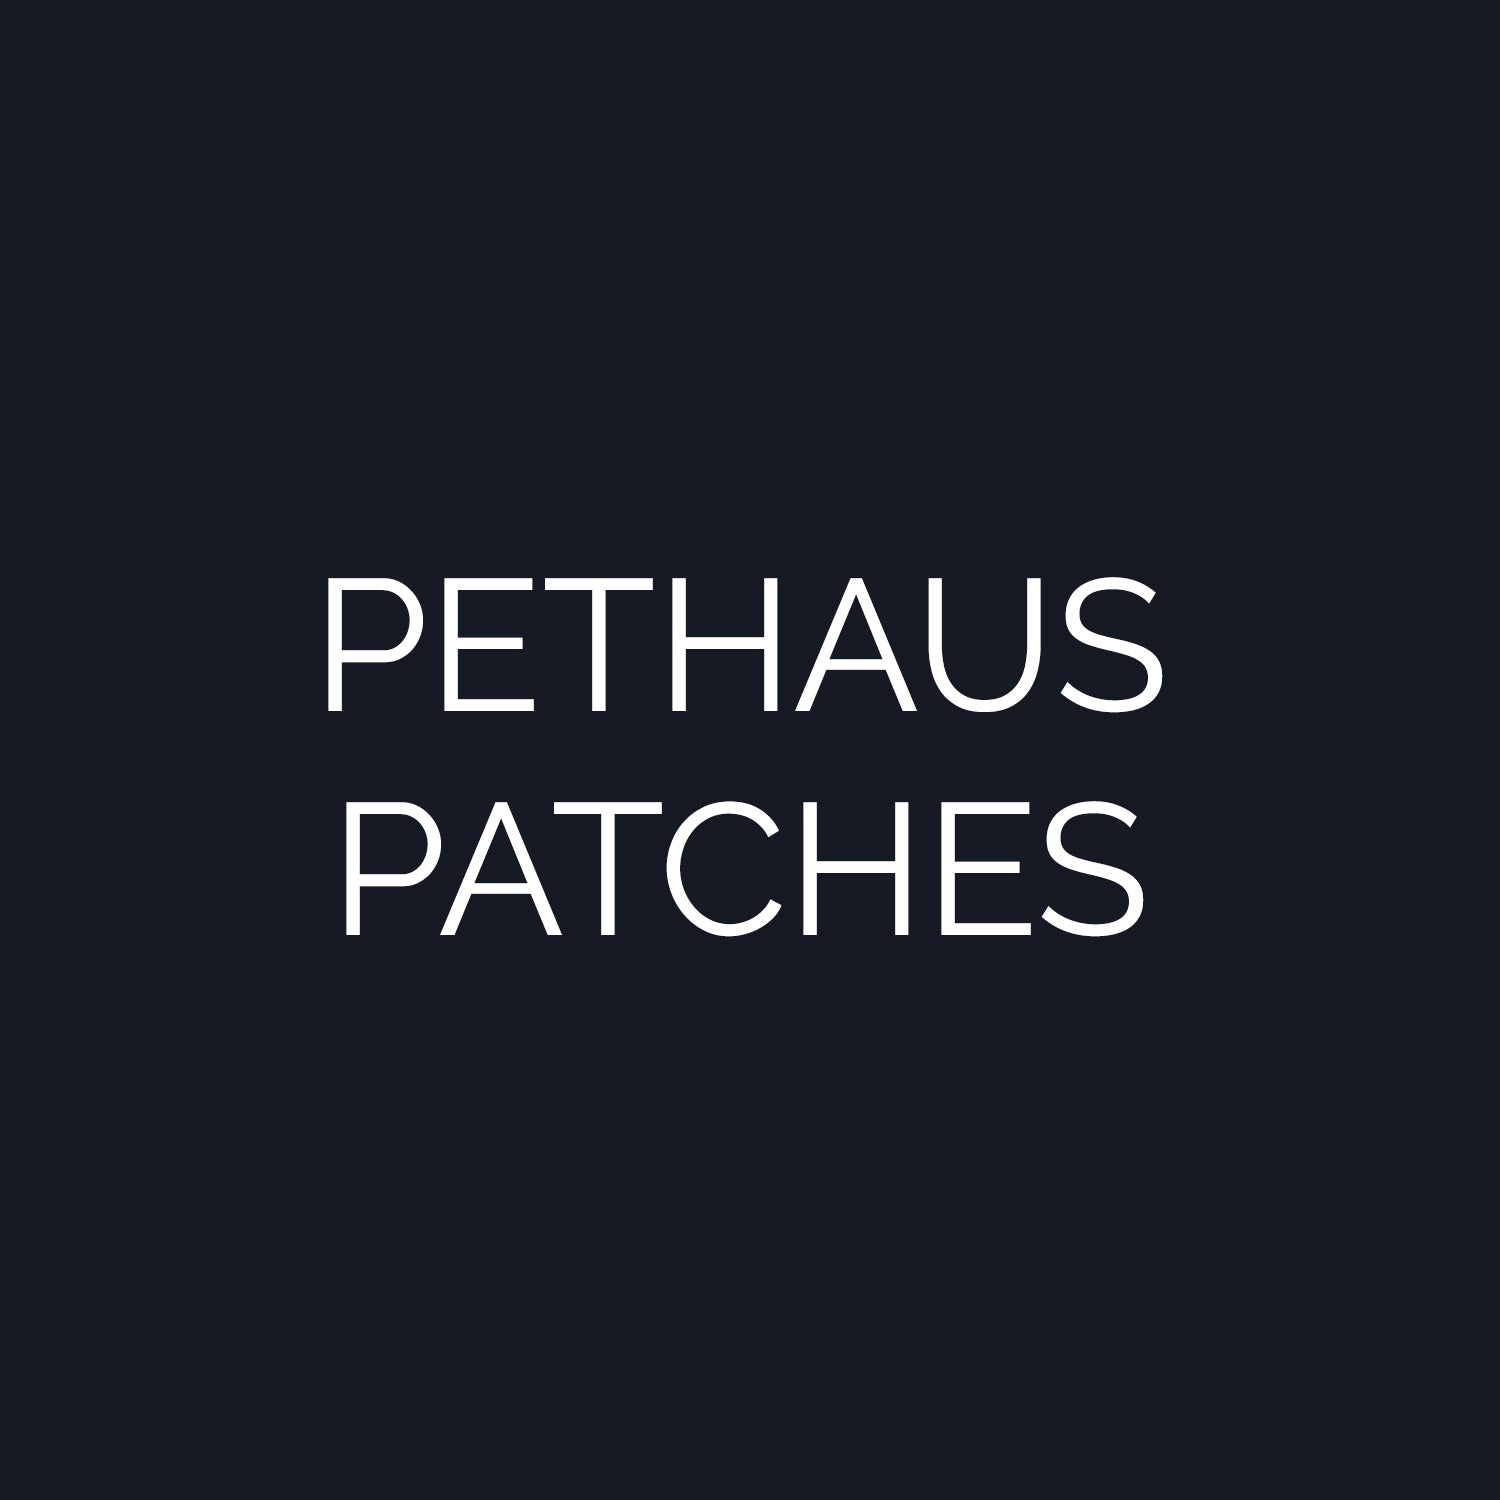 PETHAUS PATCHES